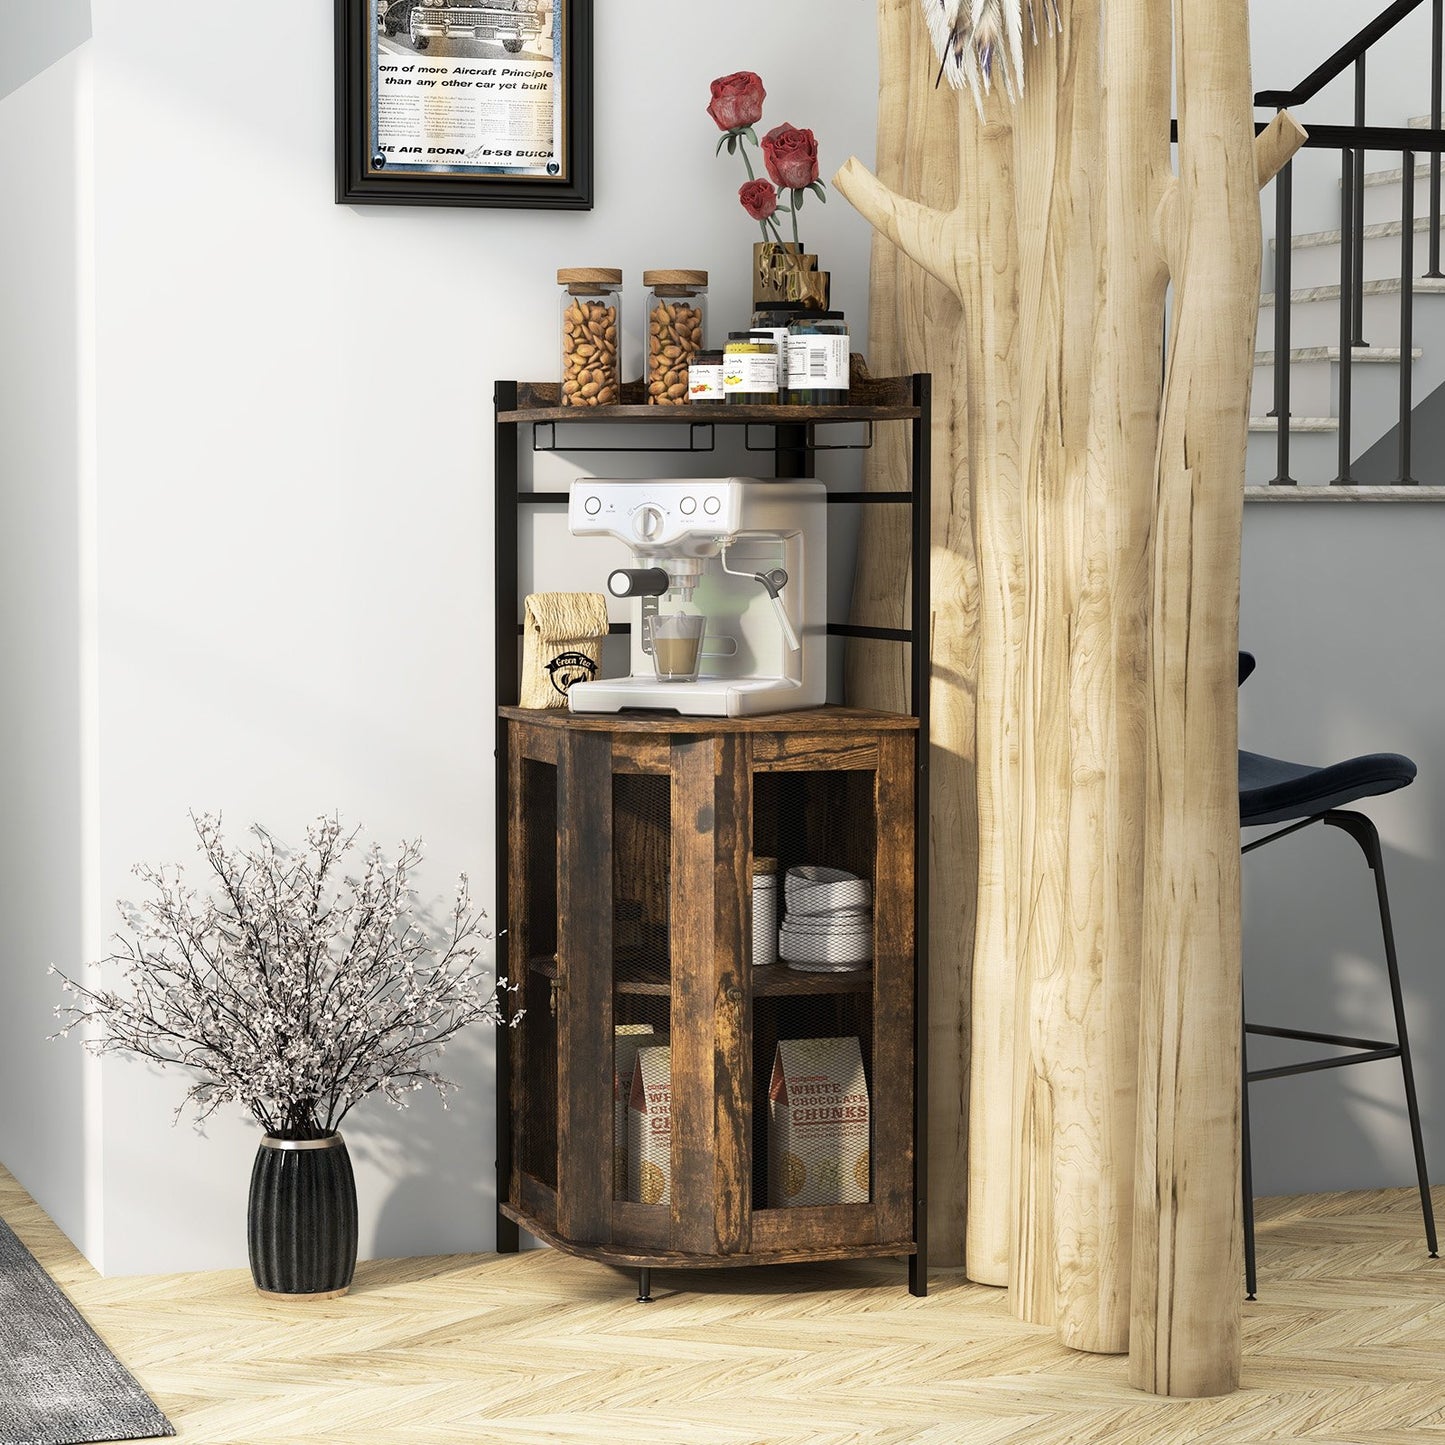 Industrial Corner Bar Cabinet with Glass Holder and Adjustable Shelf, Rustic Brown